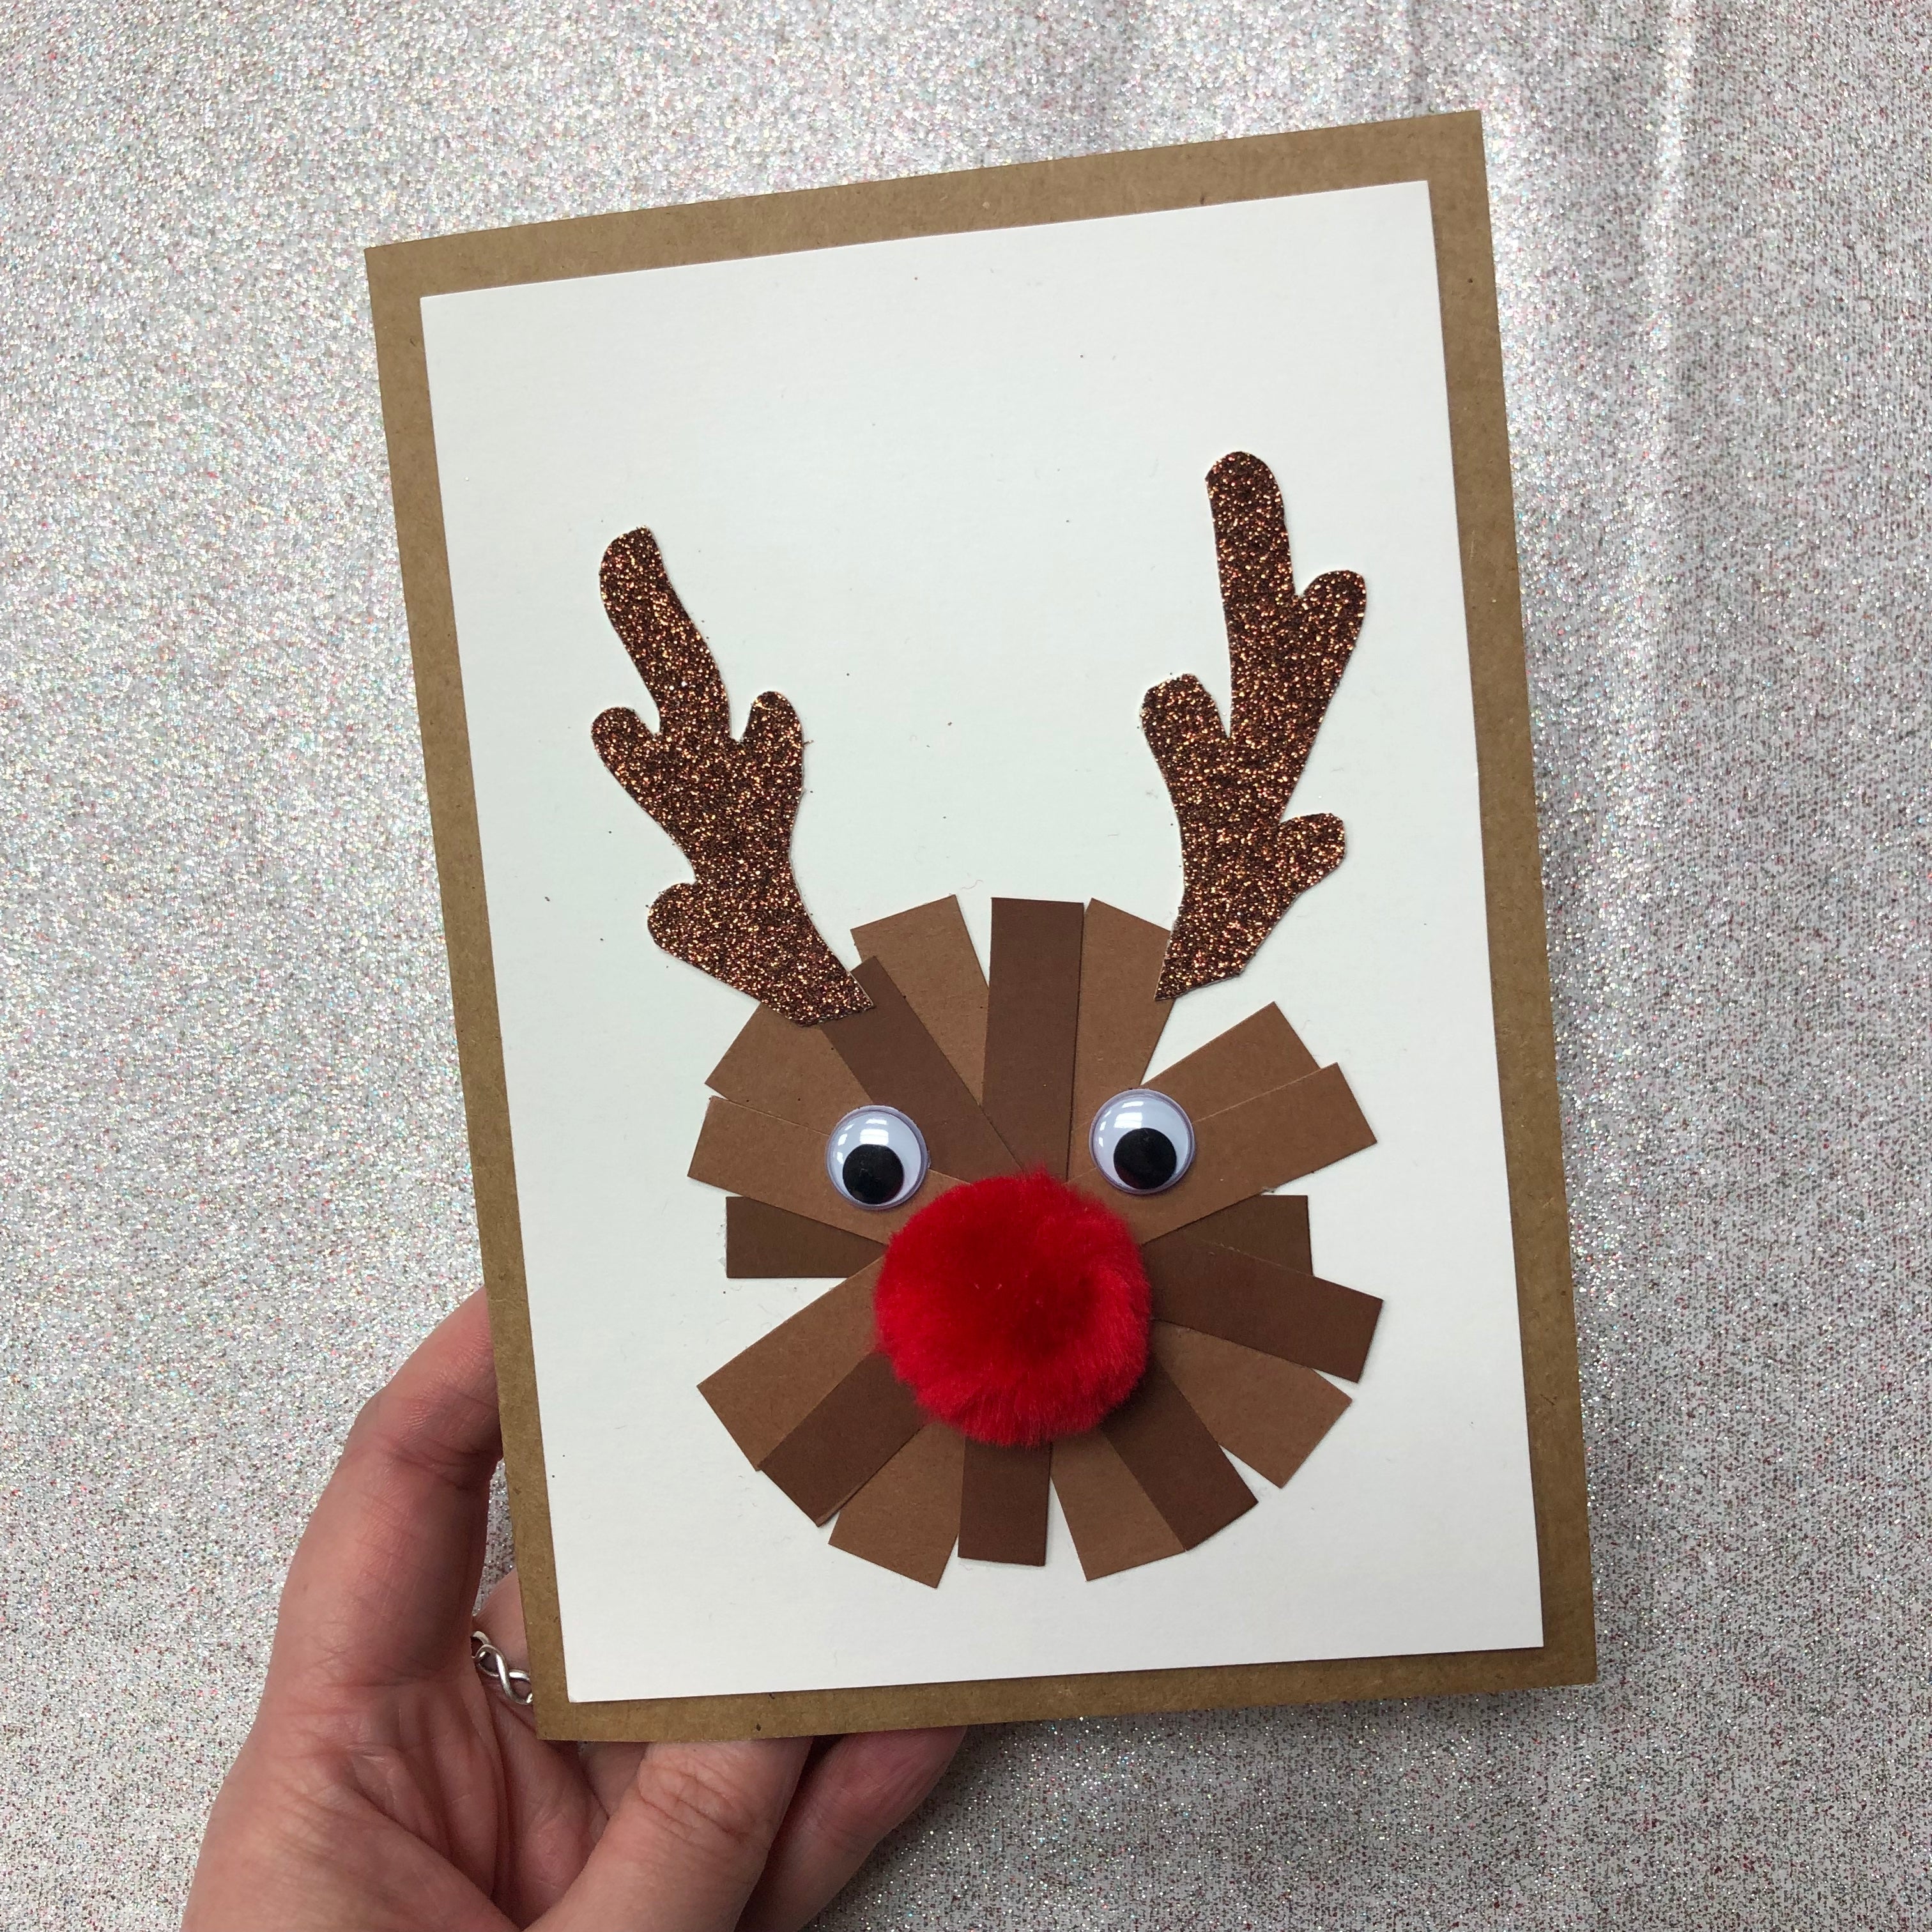 Crafting for Kids - Papercrafting Christmas Cards: Saturday 16th December